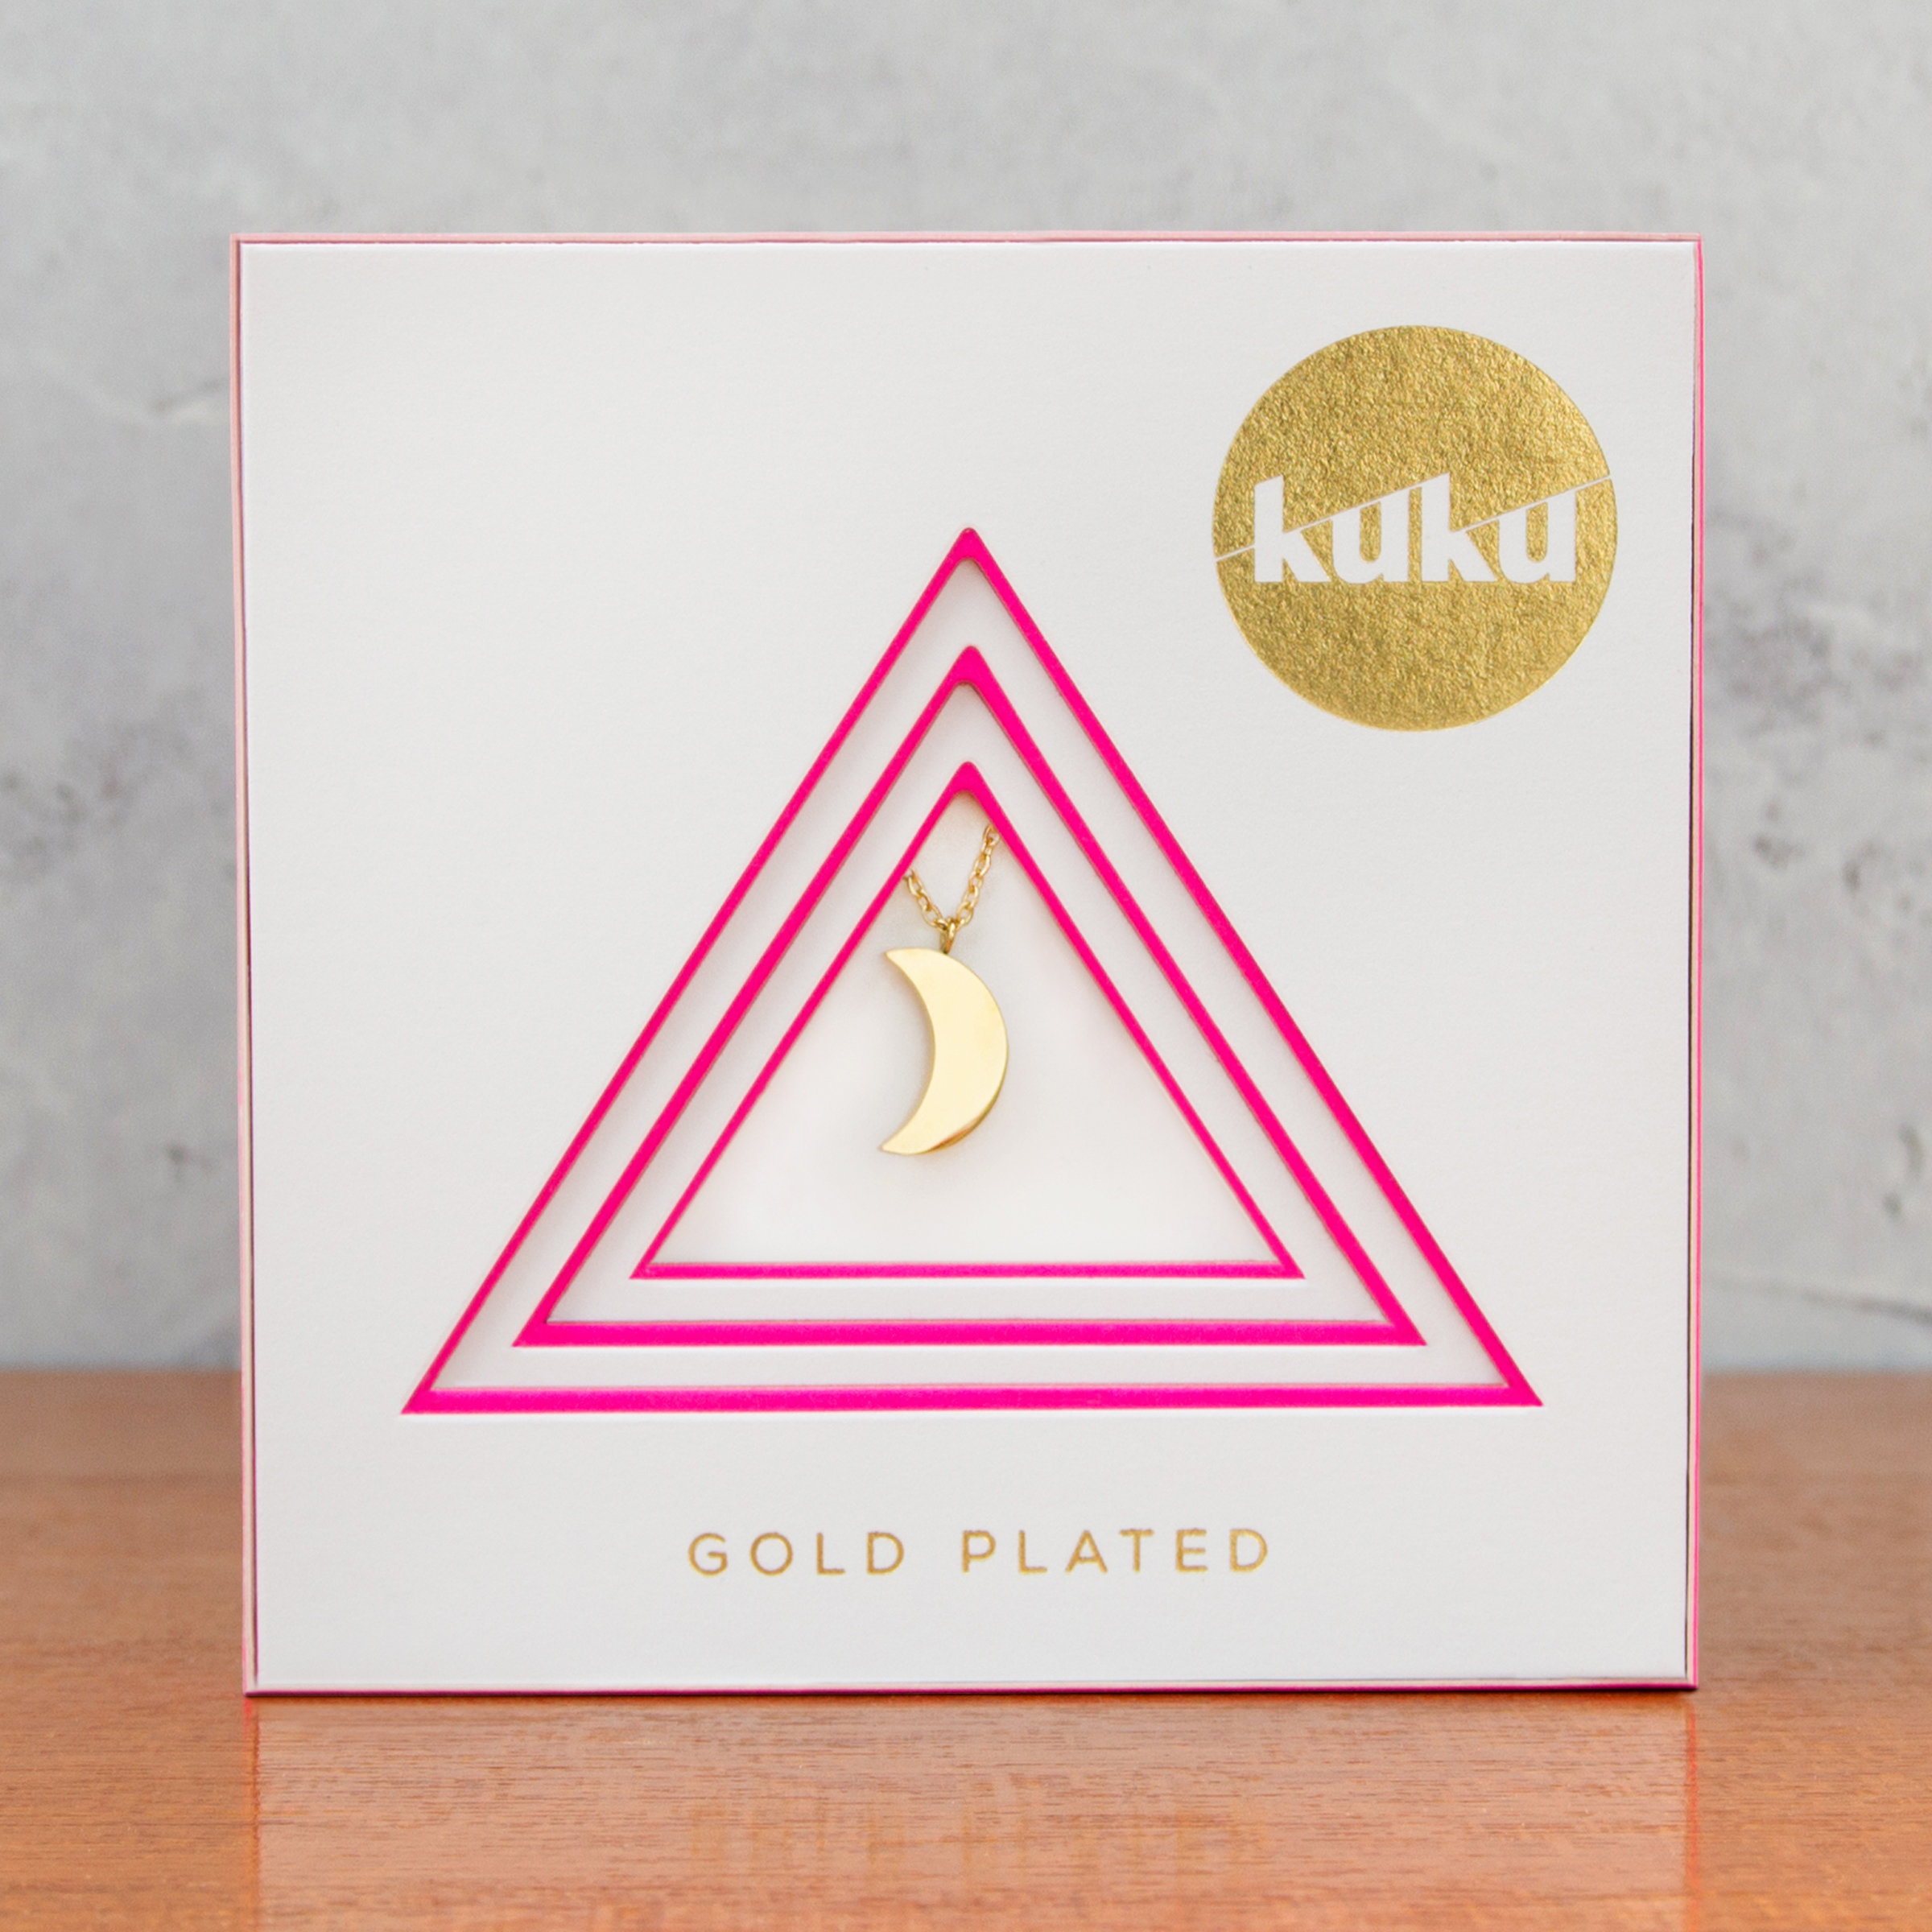 Kuku gold crescent moon necklace in packaging